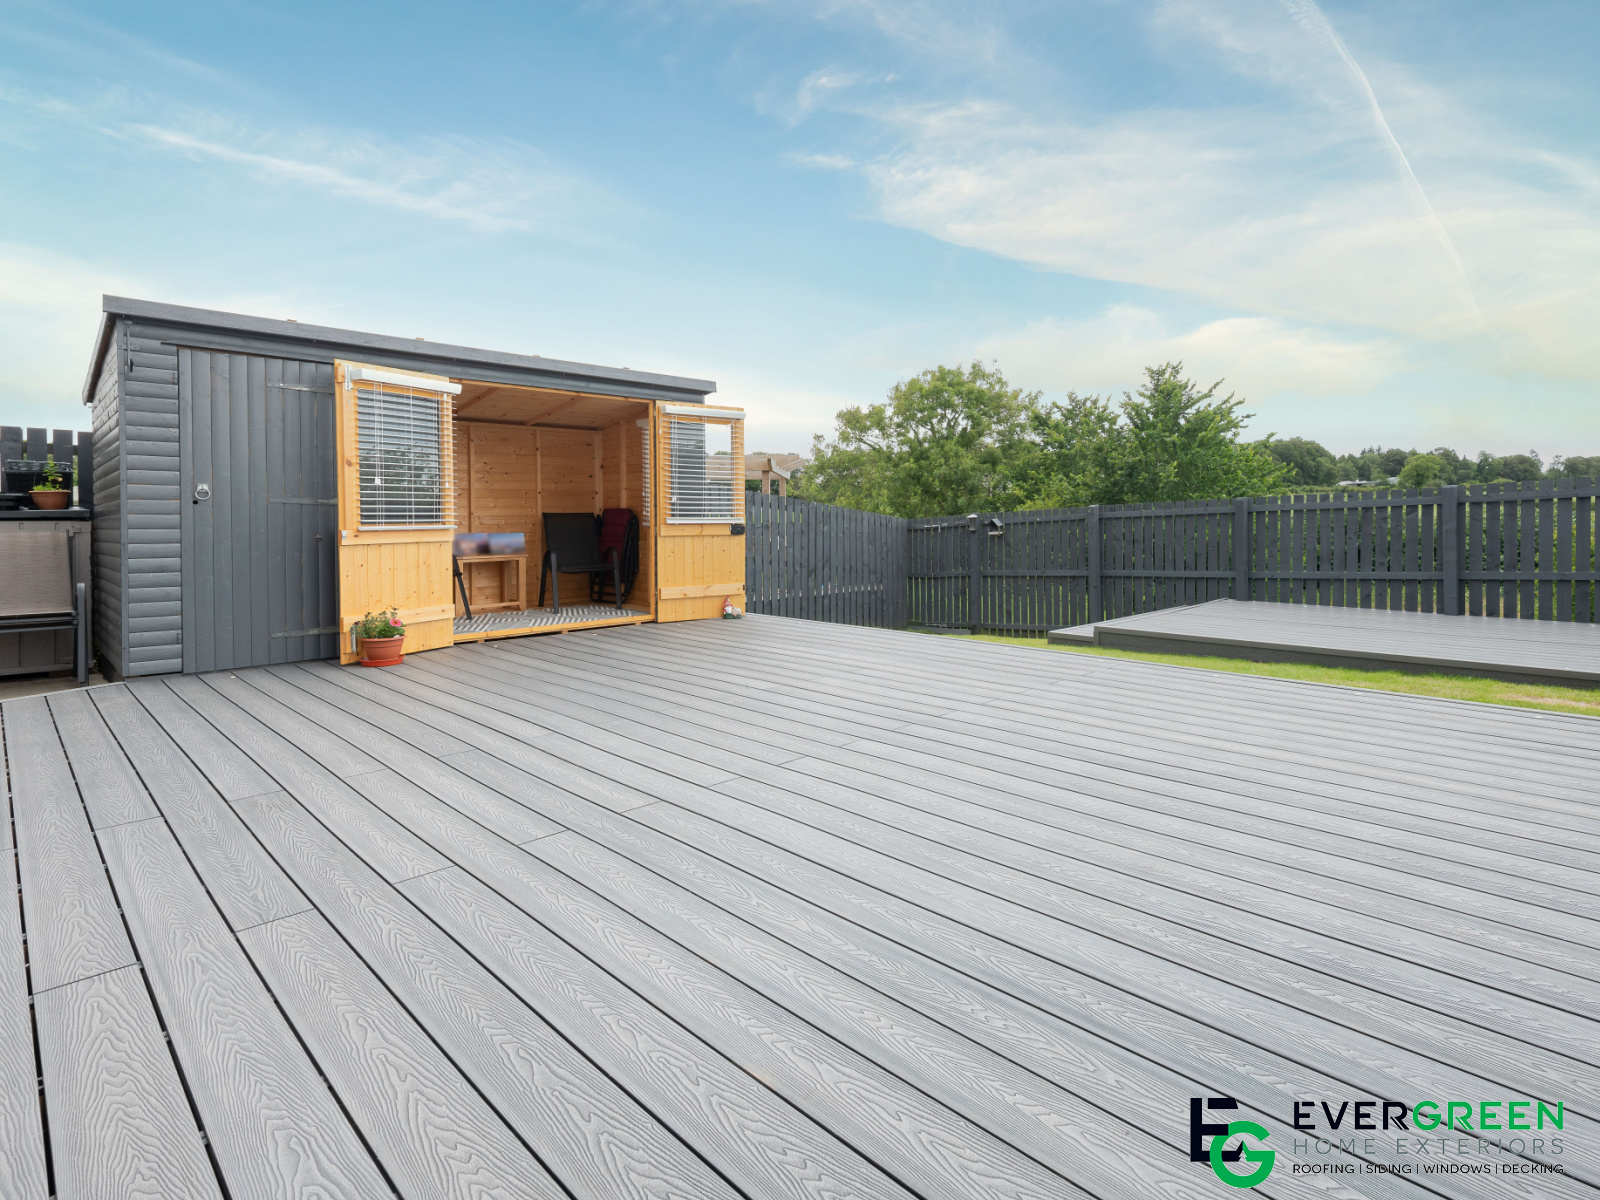 Experience True Outdoor Living with Evergreen Home Exteriors